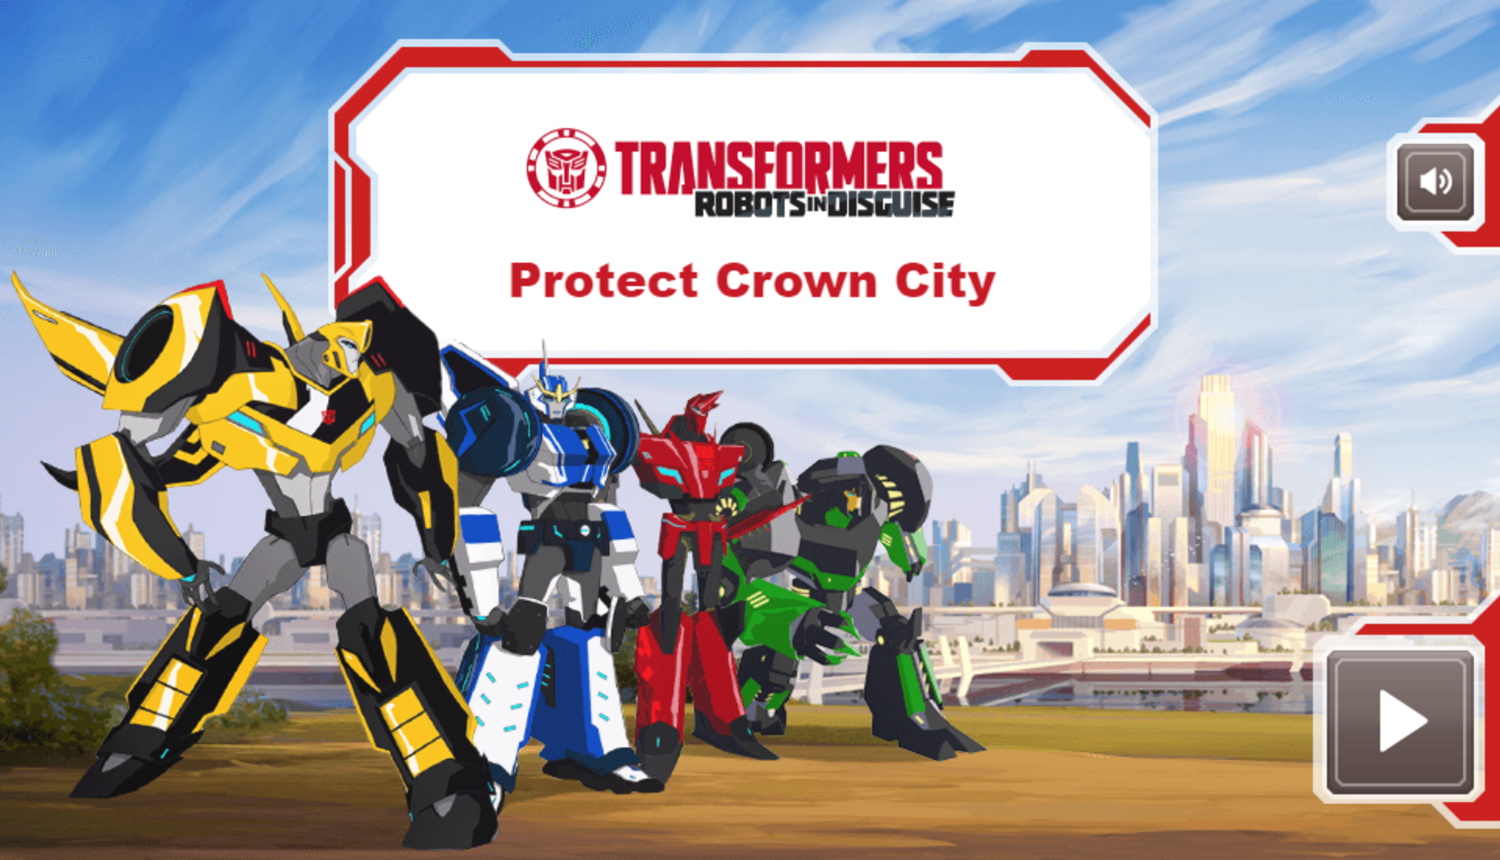 Transformers Protect Crown City Game Welcome Screen Screenshot.